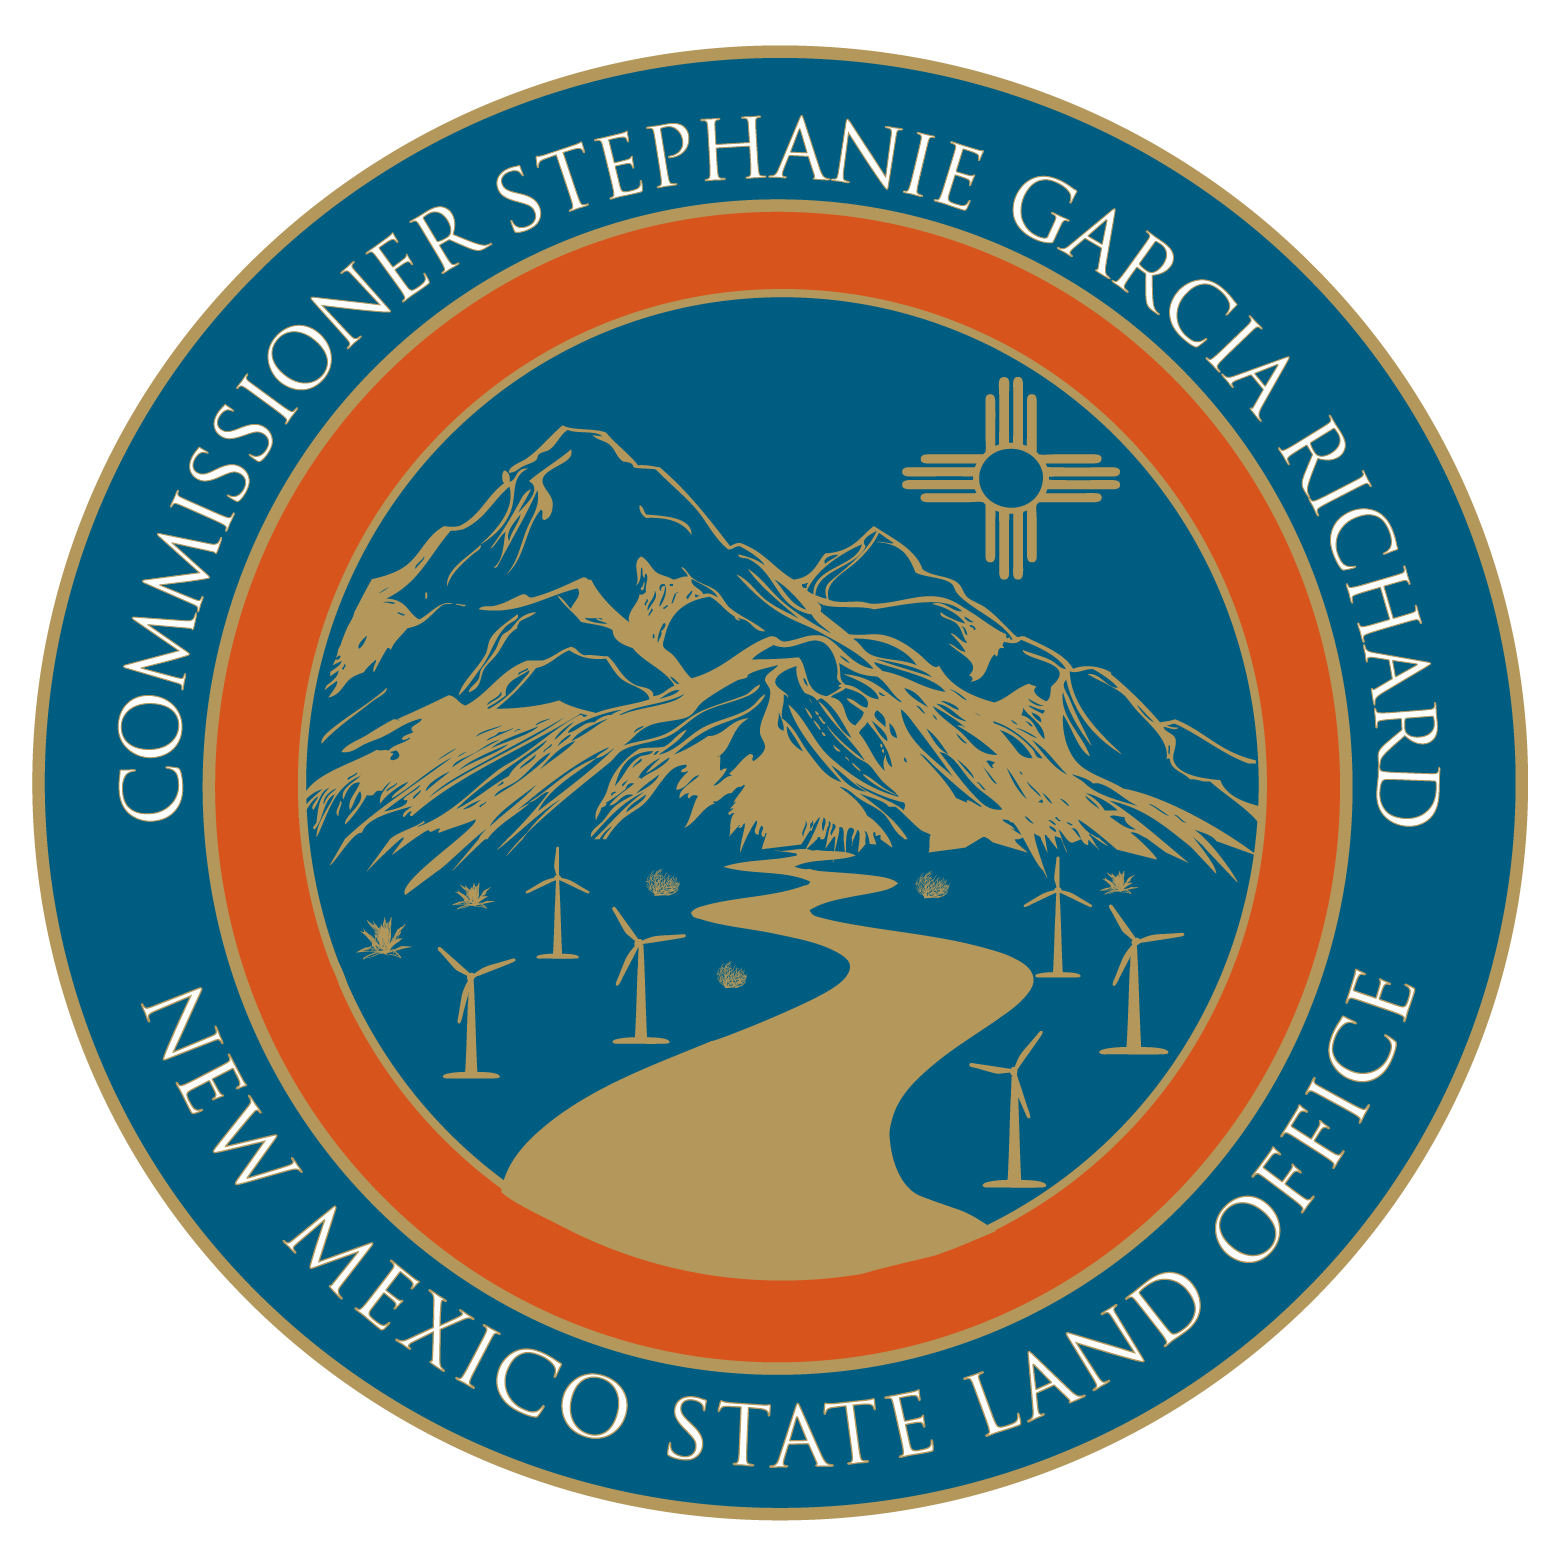 New Mexico State Land Office logo